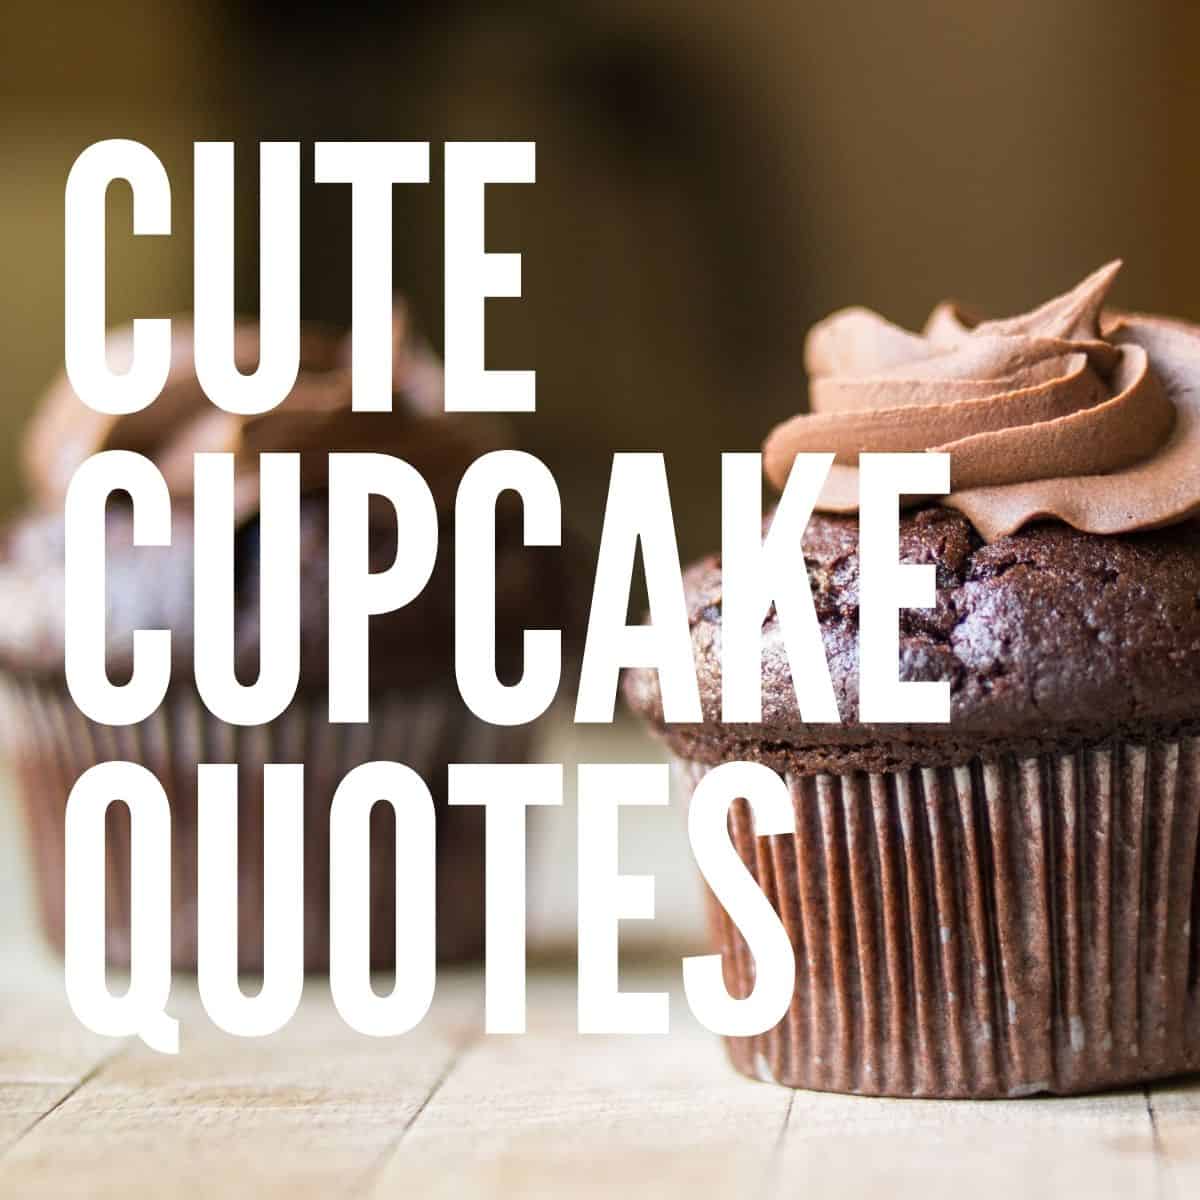 Chocolate cupcake with frosting and overlaying text